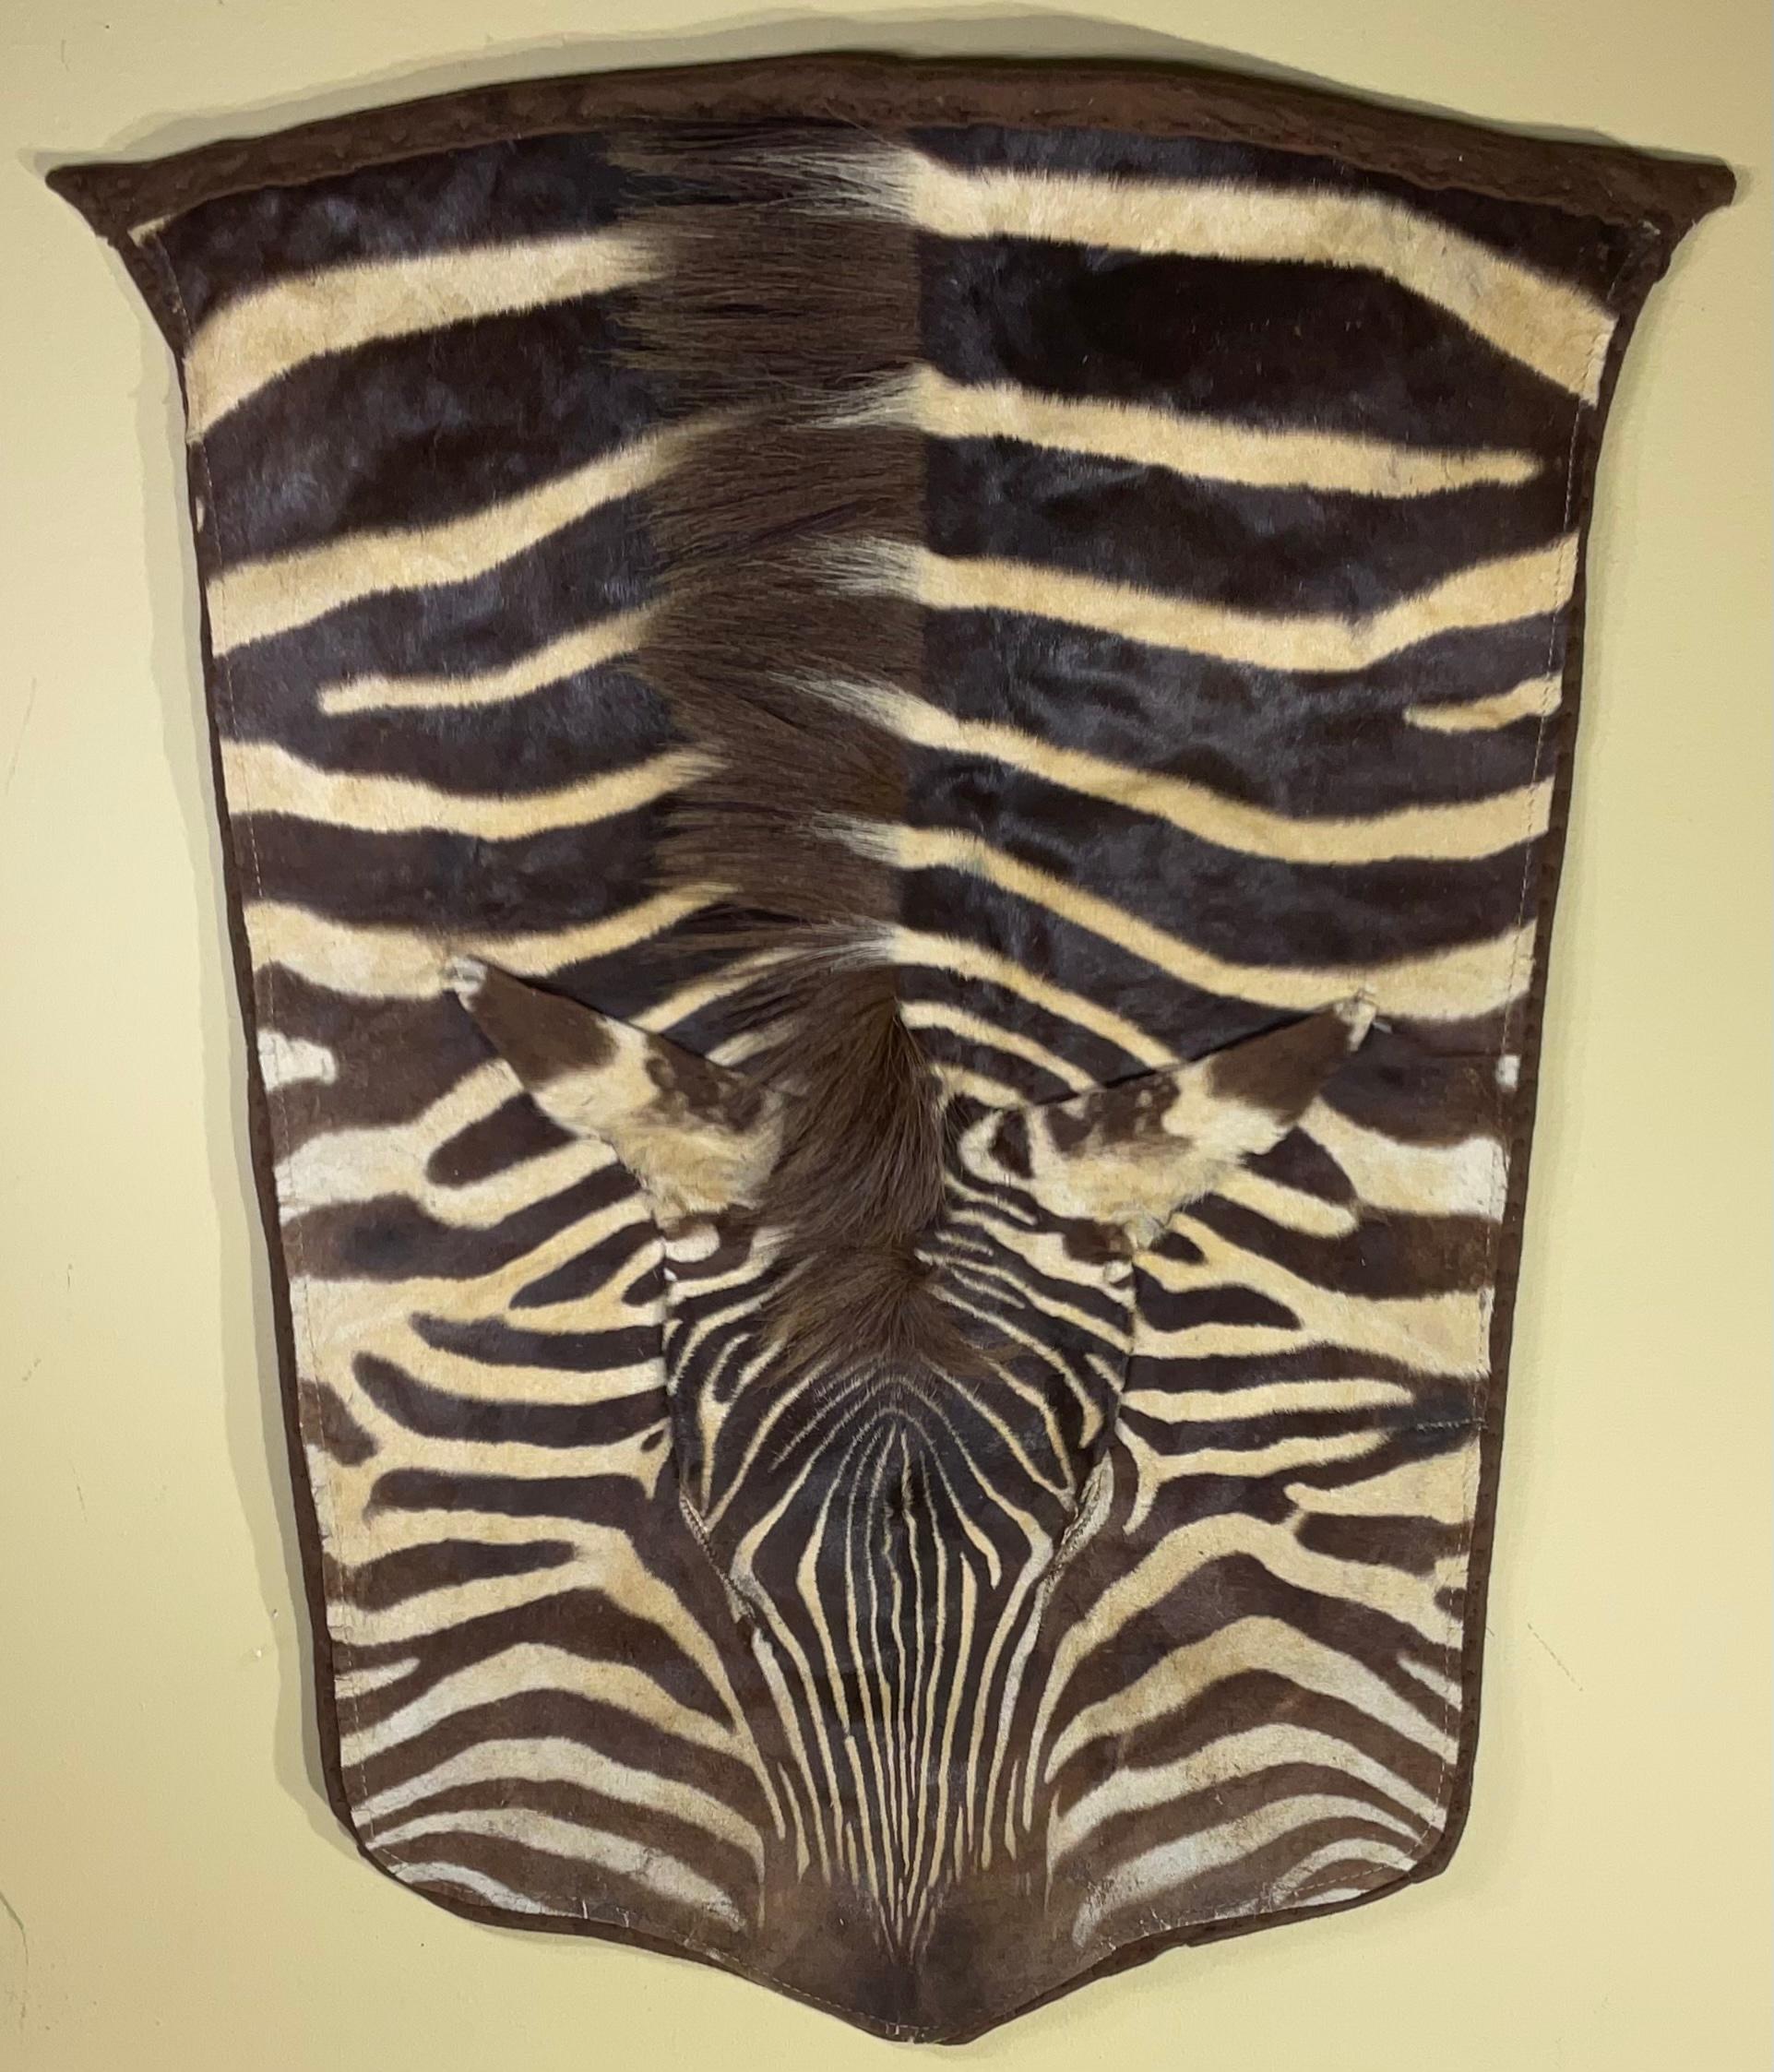 Part of genuine zebra hide included the head restored to become a decorative wall hanging, although could be used also as floor cover.
Original felt backing.
Great decorative item for any room.
 